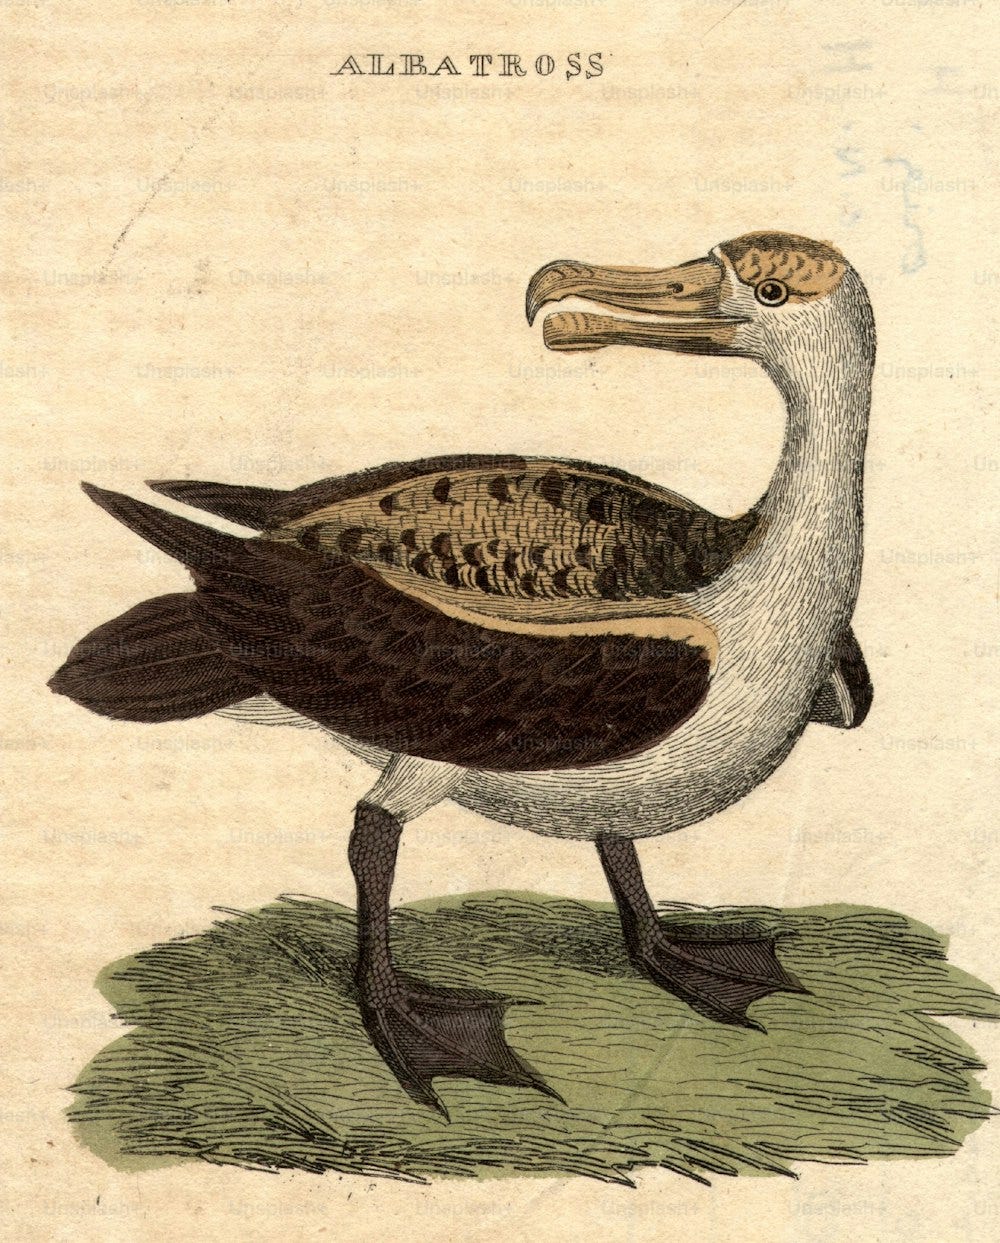 circa 1800:  An Albatross, a large-winged sea bird capable of long flights.  (Photo by Hulton Archive/Getty Images)